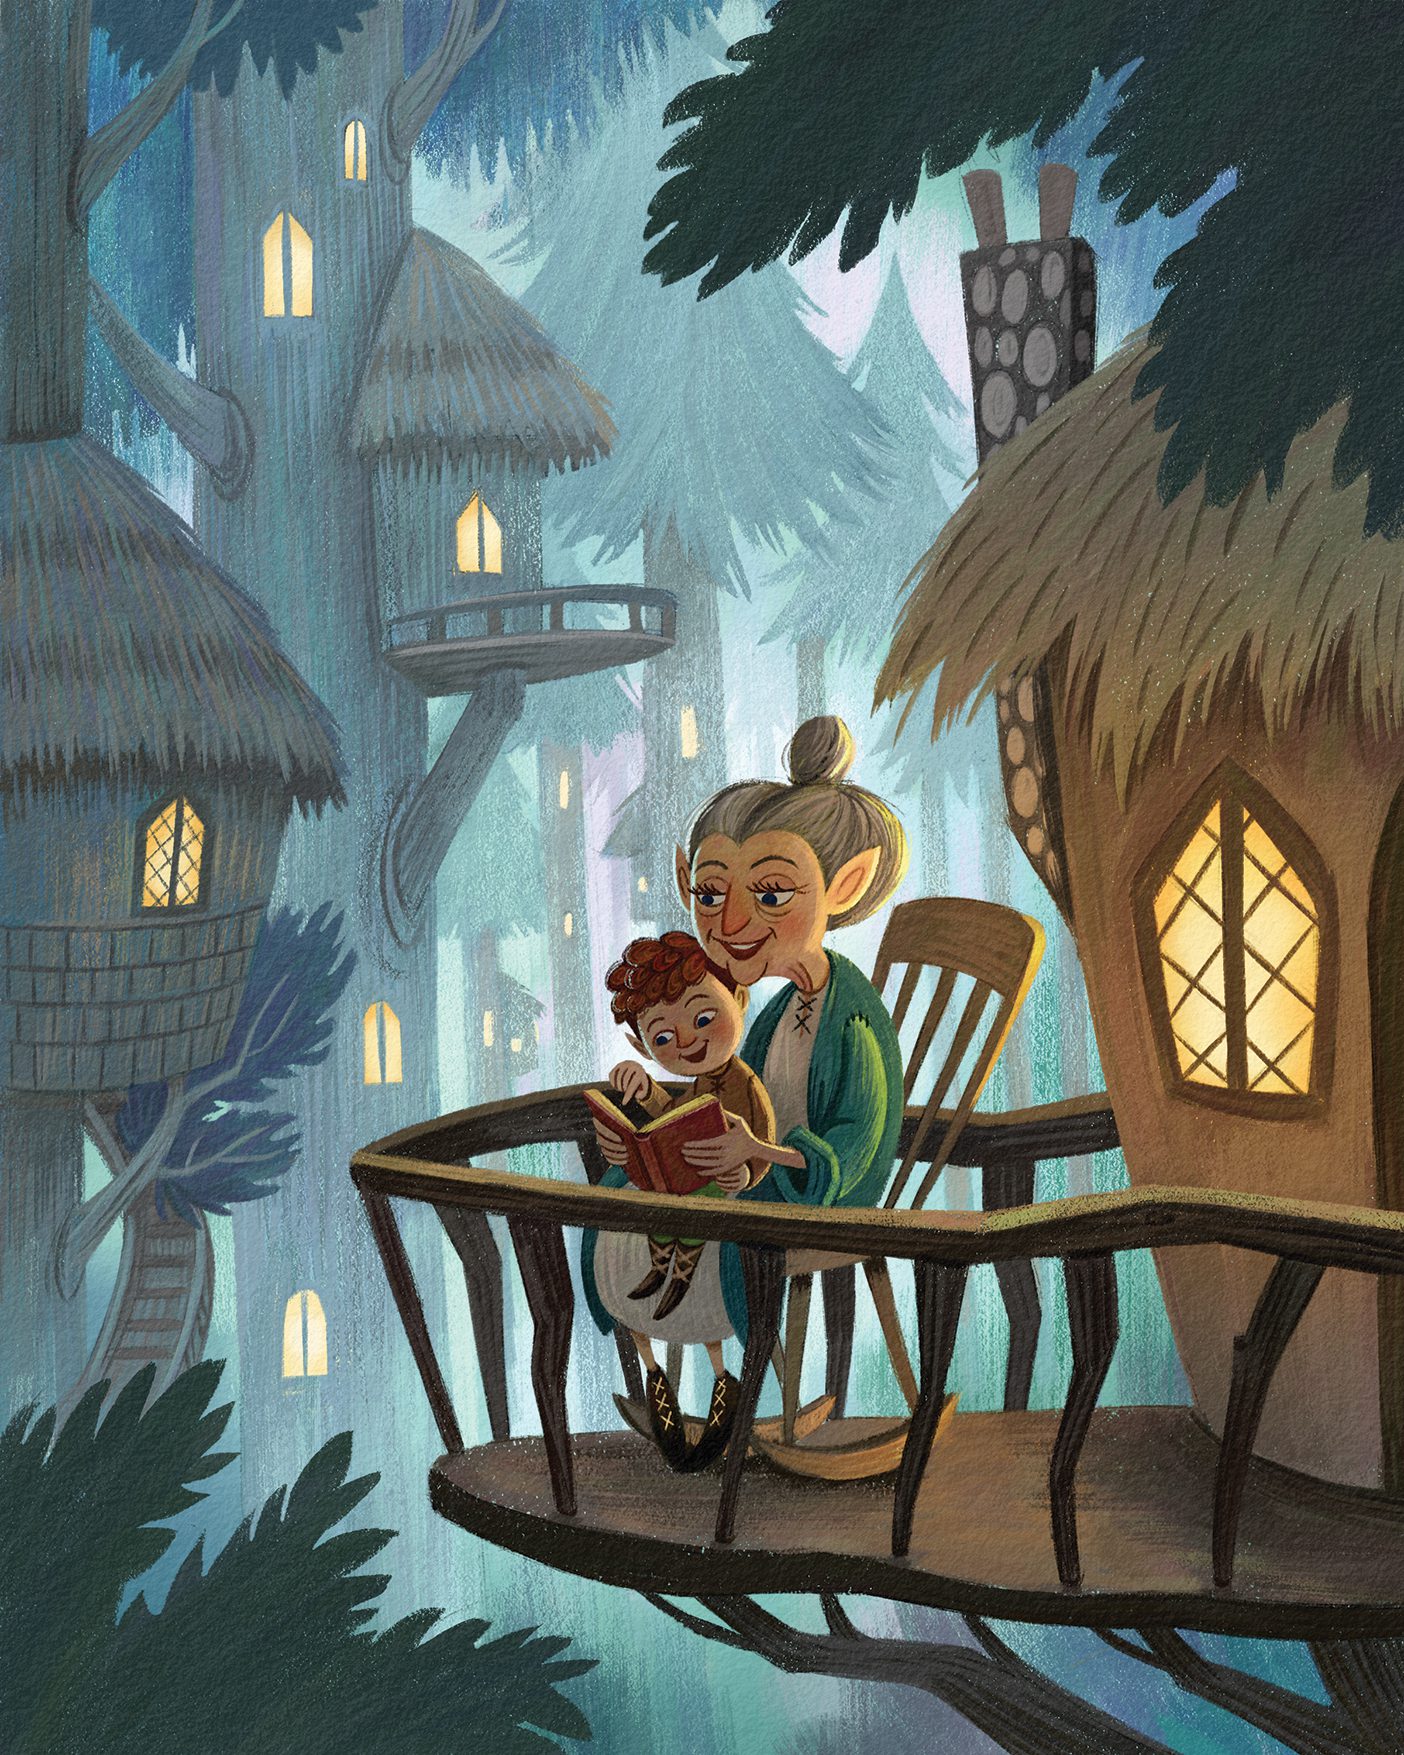 An illustration of a young child sitting on their grandmother's lap as she reads.